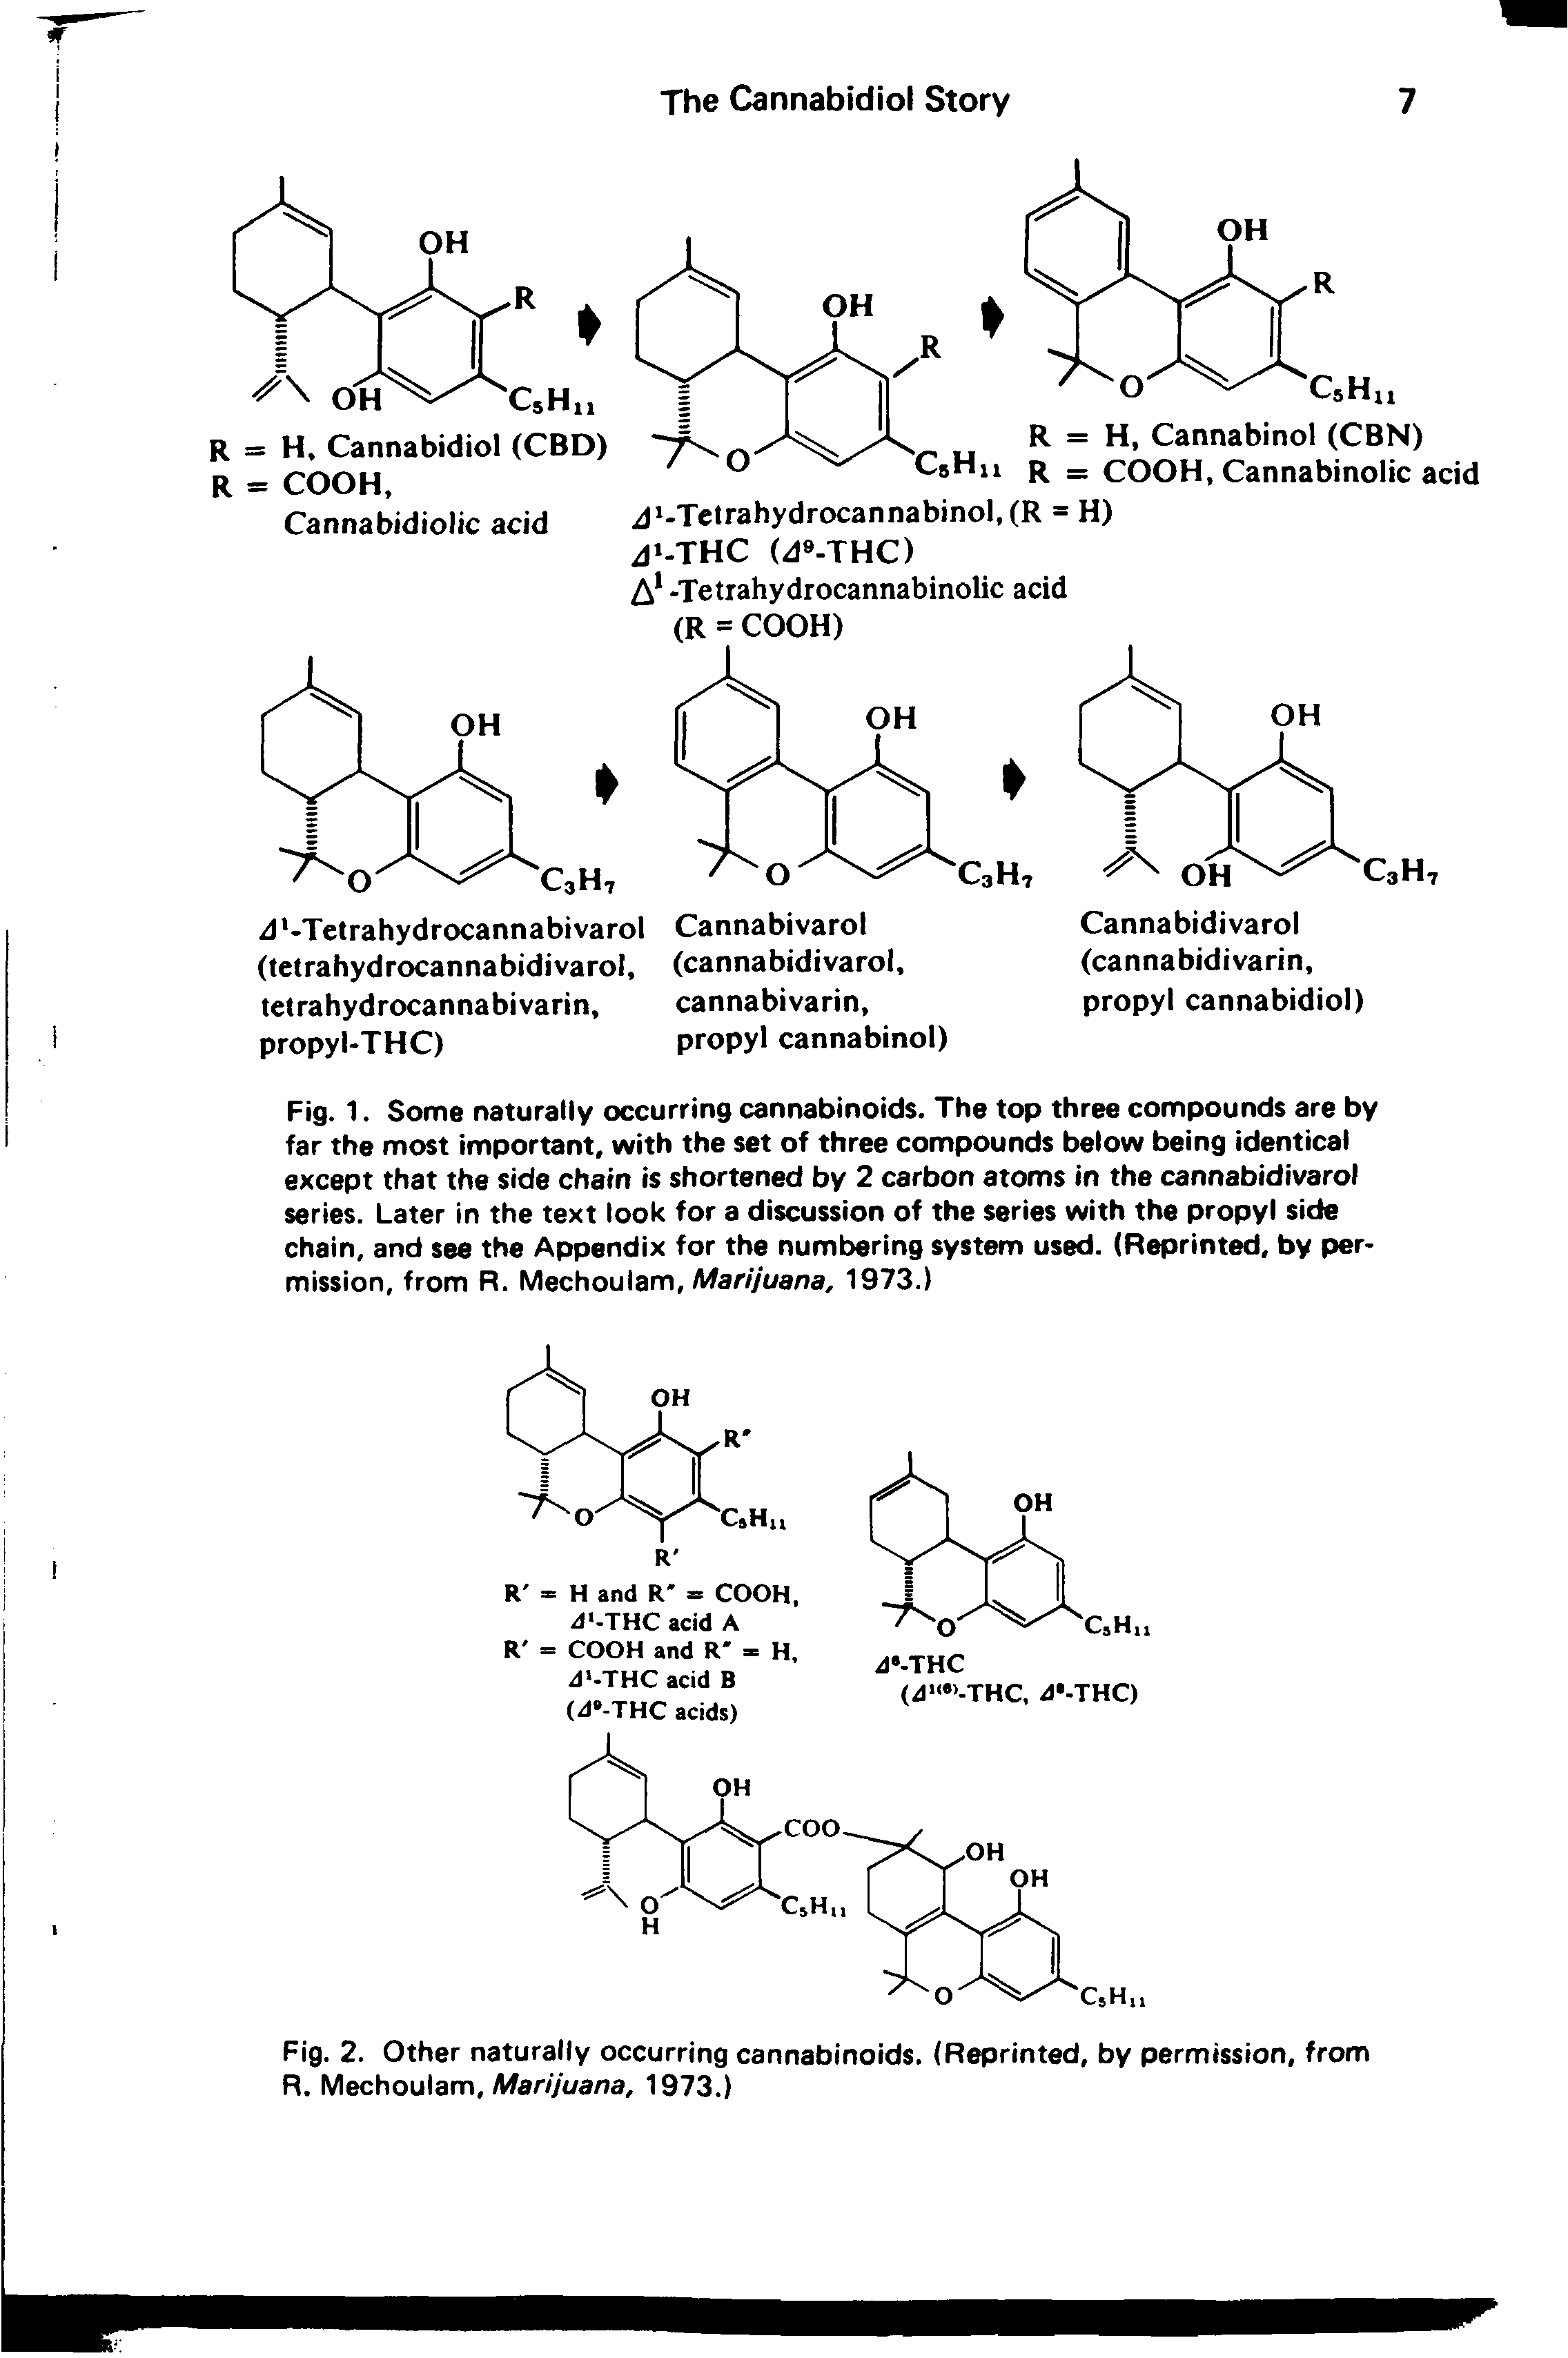 Fig. 1. Some naturally occurring cannabinoids. The top three compounds are by far the most important, with the set of three compounds below being identical except that the side chain is shortened by 2 carbon atoms in the cannabidivarol series. Later in the text look for a discussion of the series with the propyl side chain, and see the Appendix for the numbering system used. (Reprinted, by permission, from R. Mechoulam, Mar/yt/ana, 1973.)...